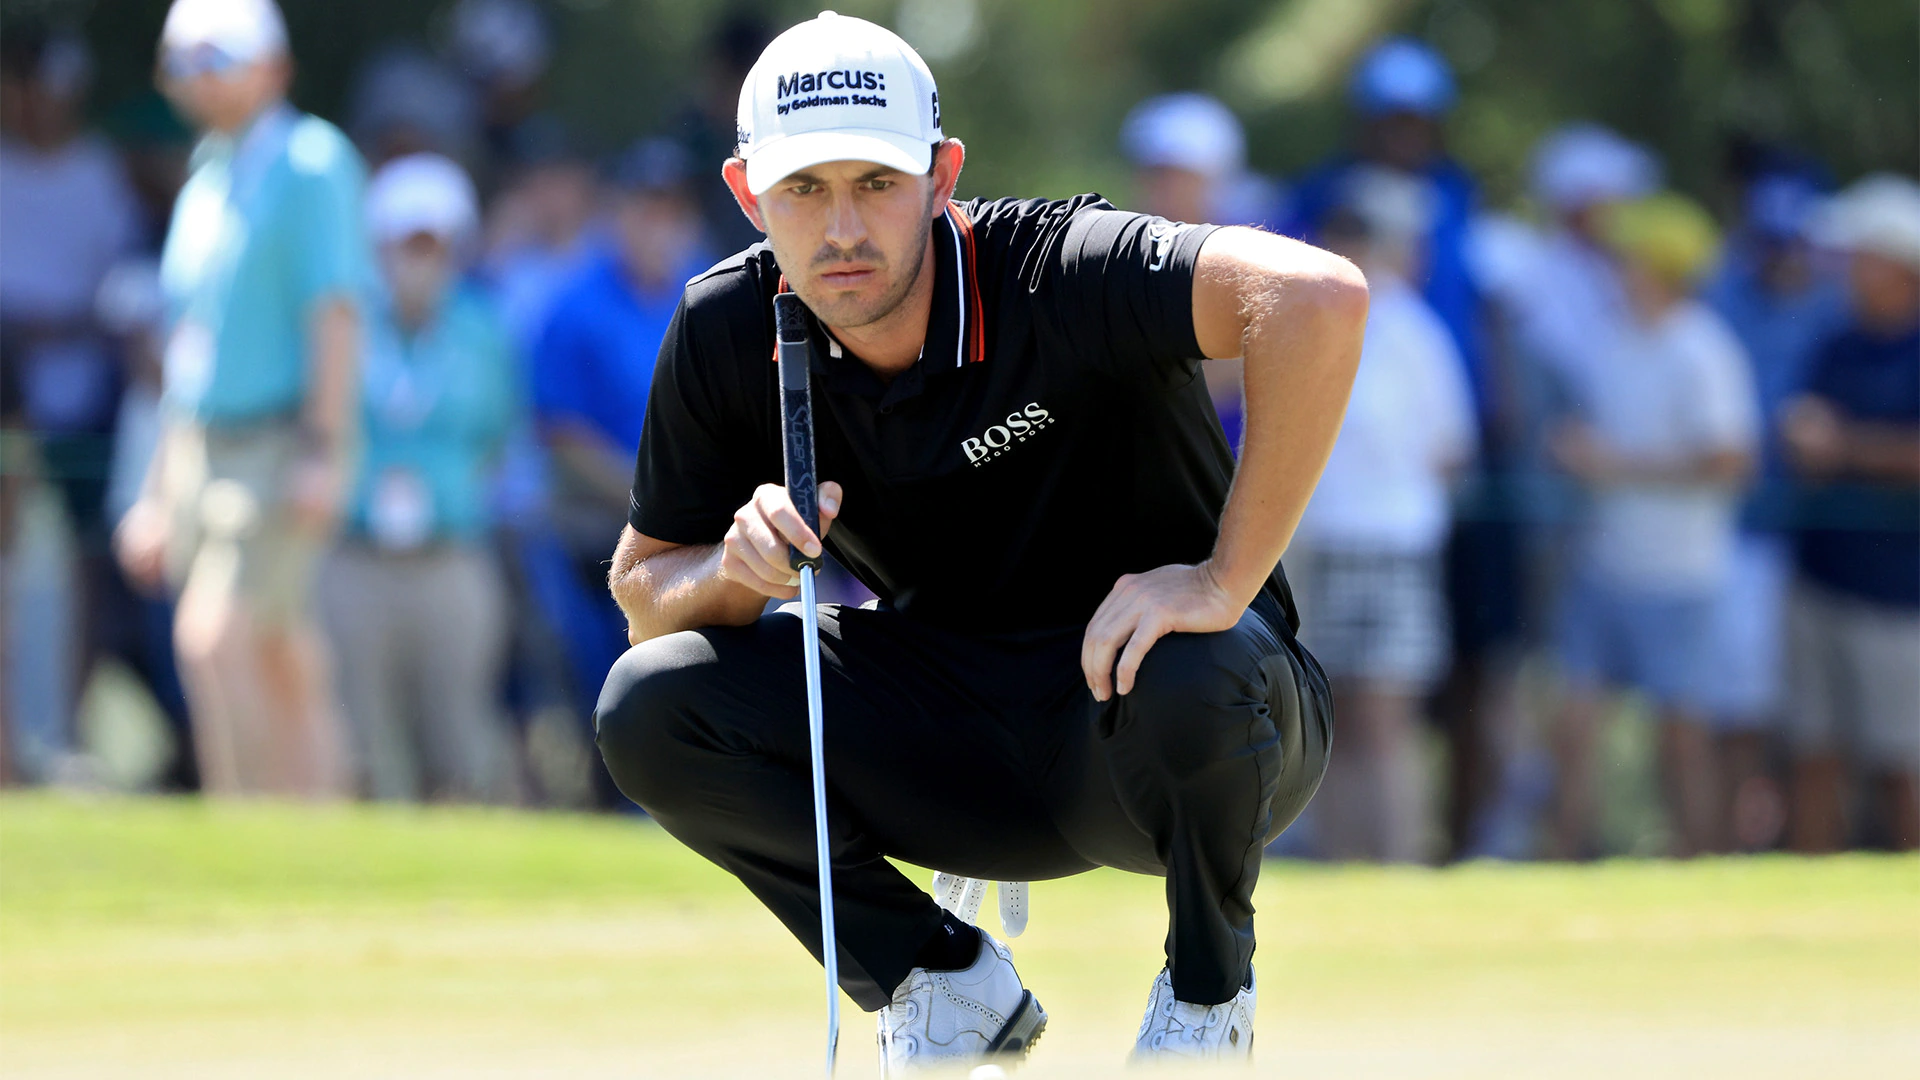 After 54 holes at Tour Champ., Patrick Cantlay has FedExCup, $15 million in sight